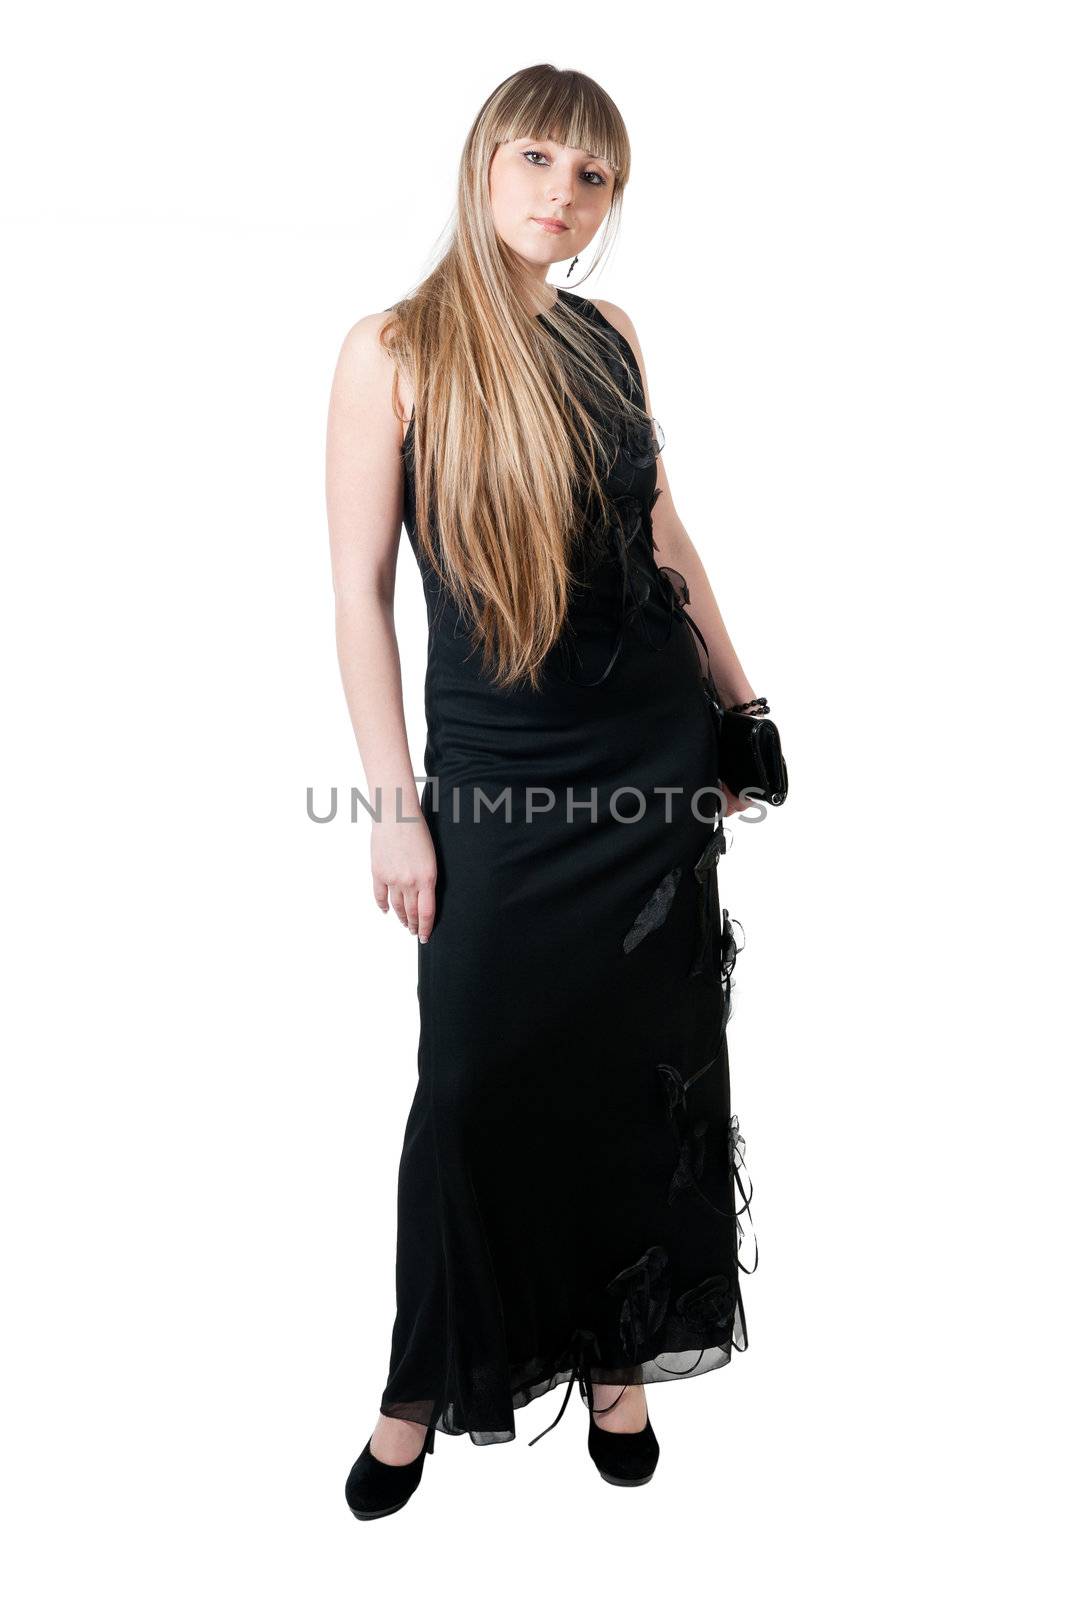 The beautiful girl in black dress isolated on white